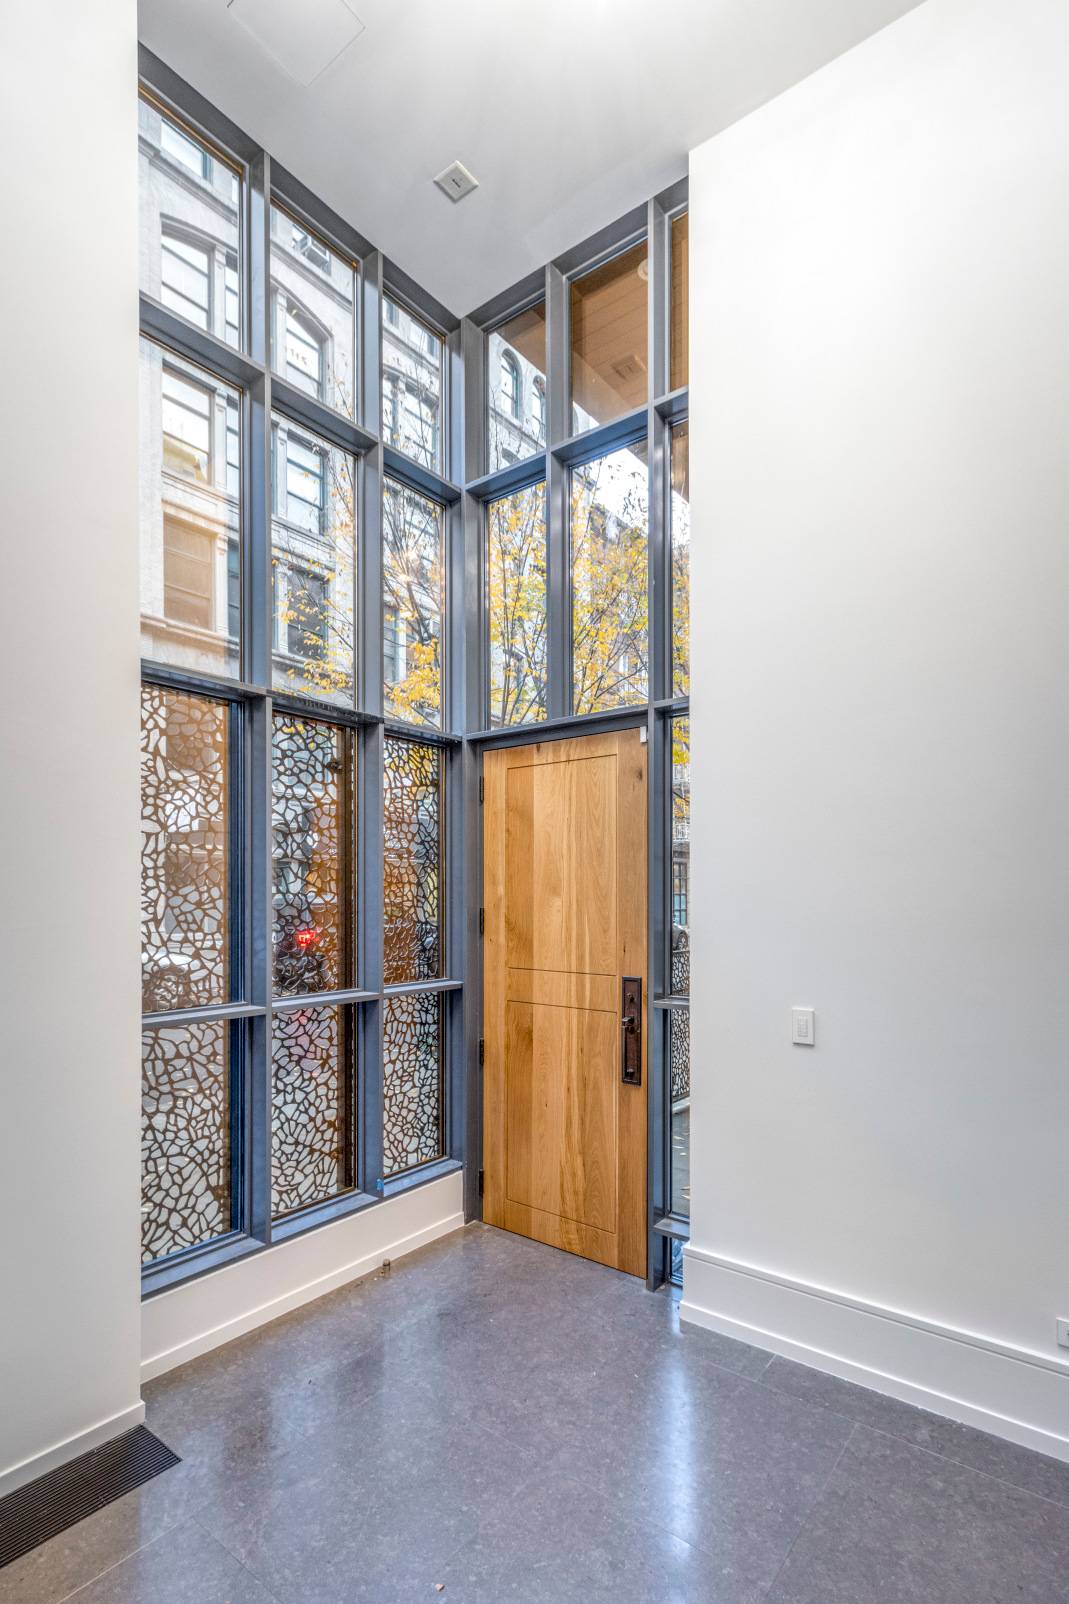 ULTIMATE PRIVACY MEETS CONVENIENCE AT THIS SULLIVAN STREET TOWNHOUSE NOW AVAILABLE FOR RENT Rarely Available amp ; Highly Desirable Triplex featuring a Private Parking Space, Exclusive Entrance on Sullivan Street, ...